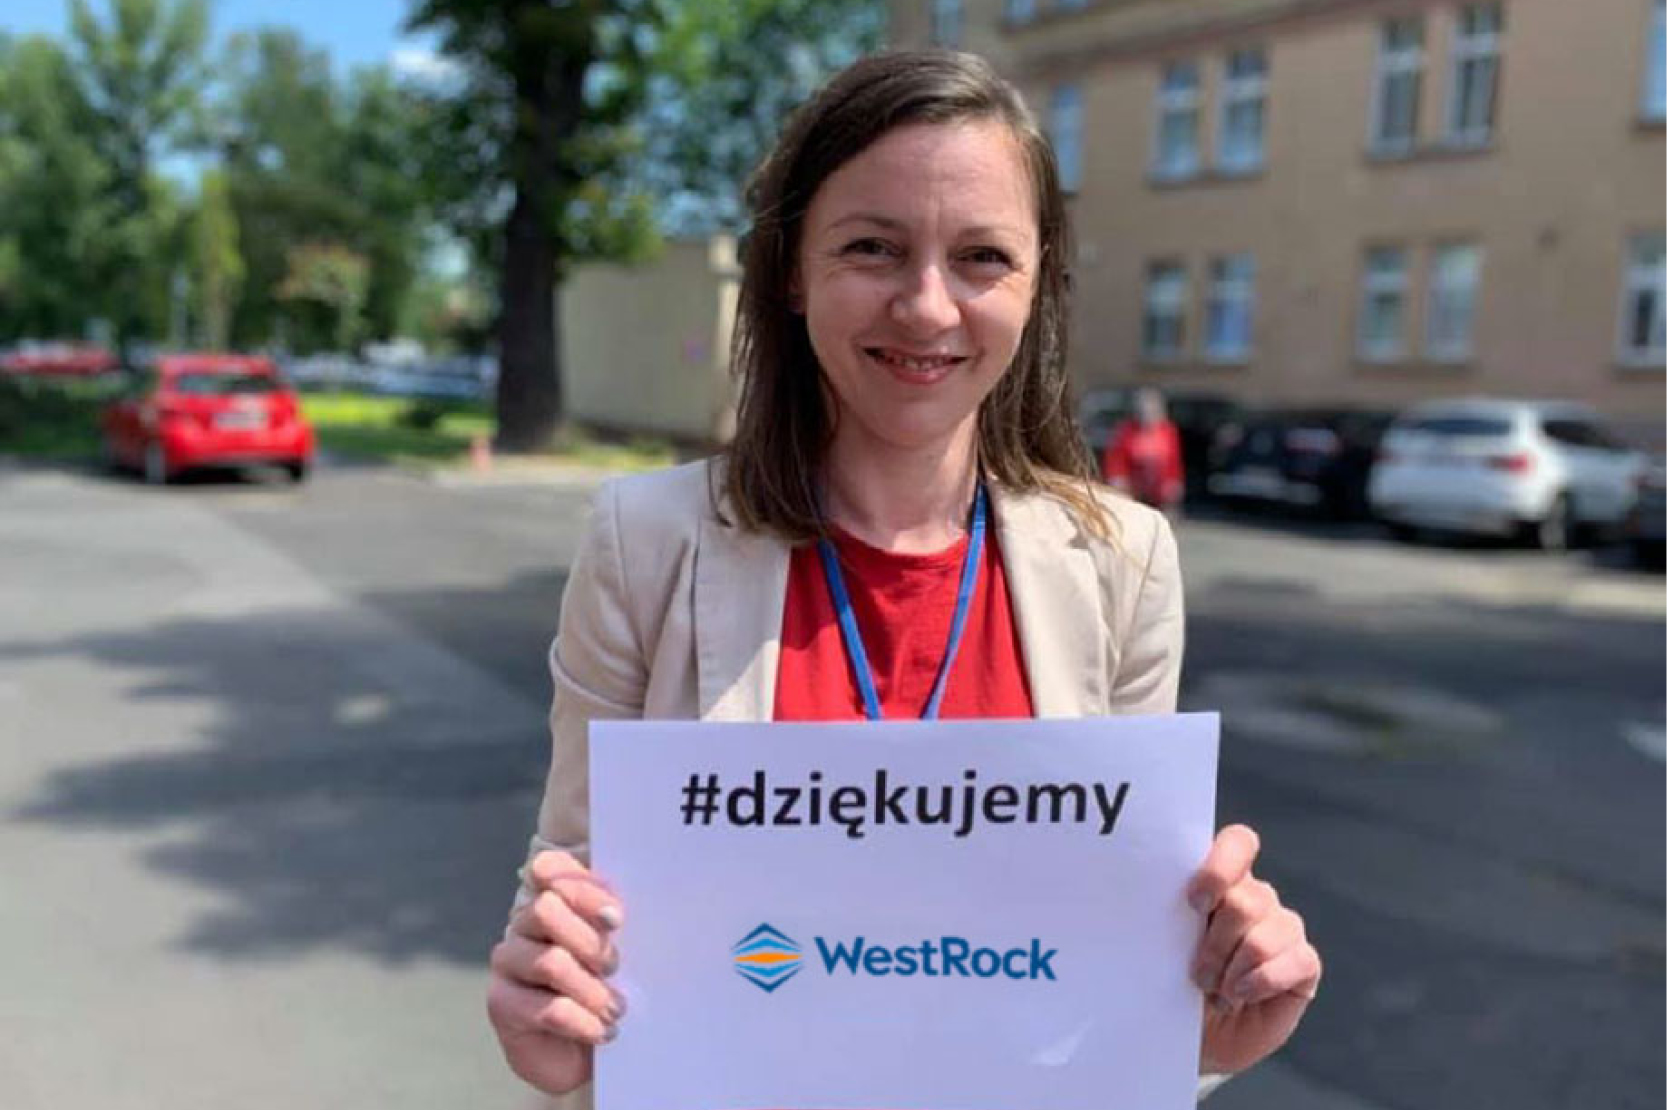 Woman holding WestRock sign in Polish